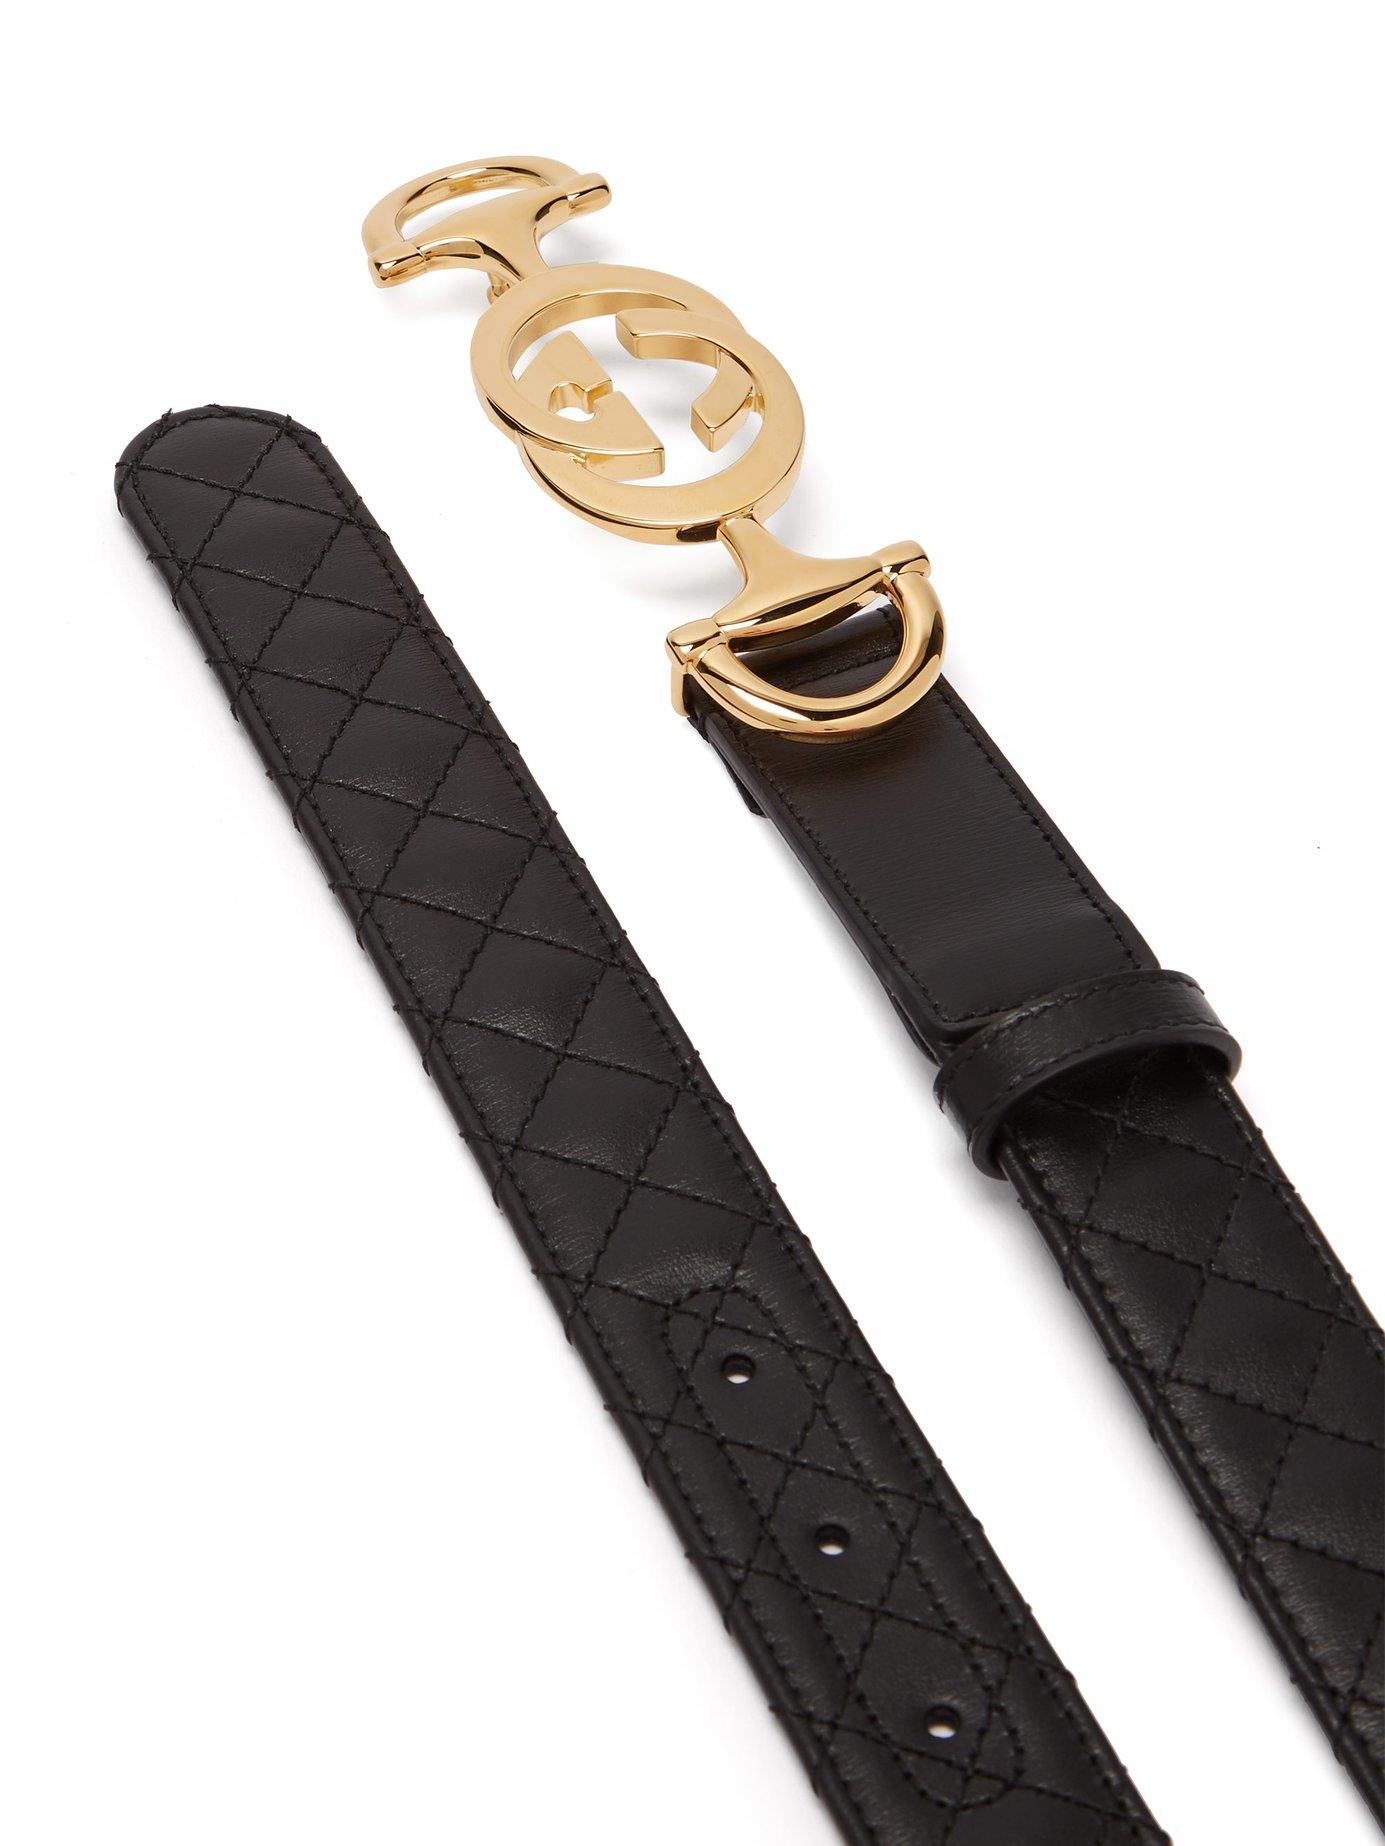 Gucci Horsebit Buckle Quilted Leather Belt in Black - Lyst